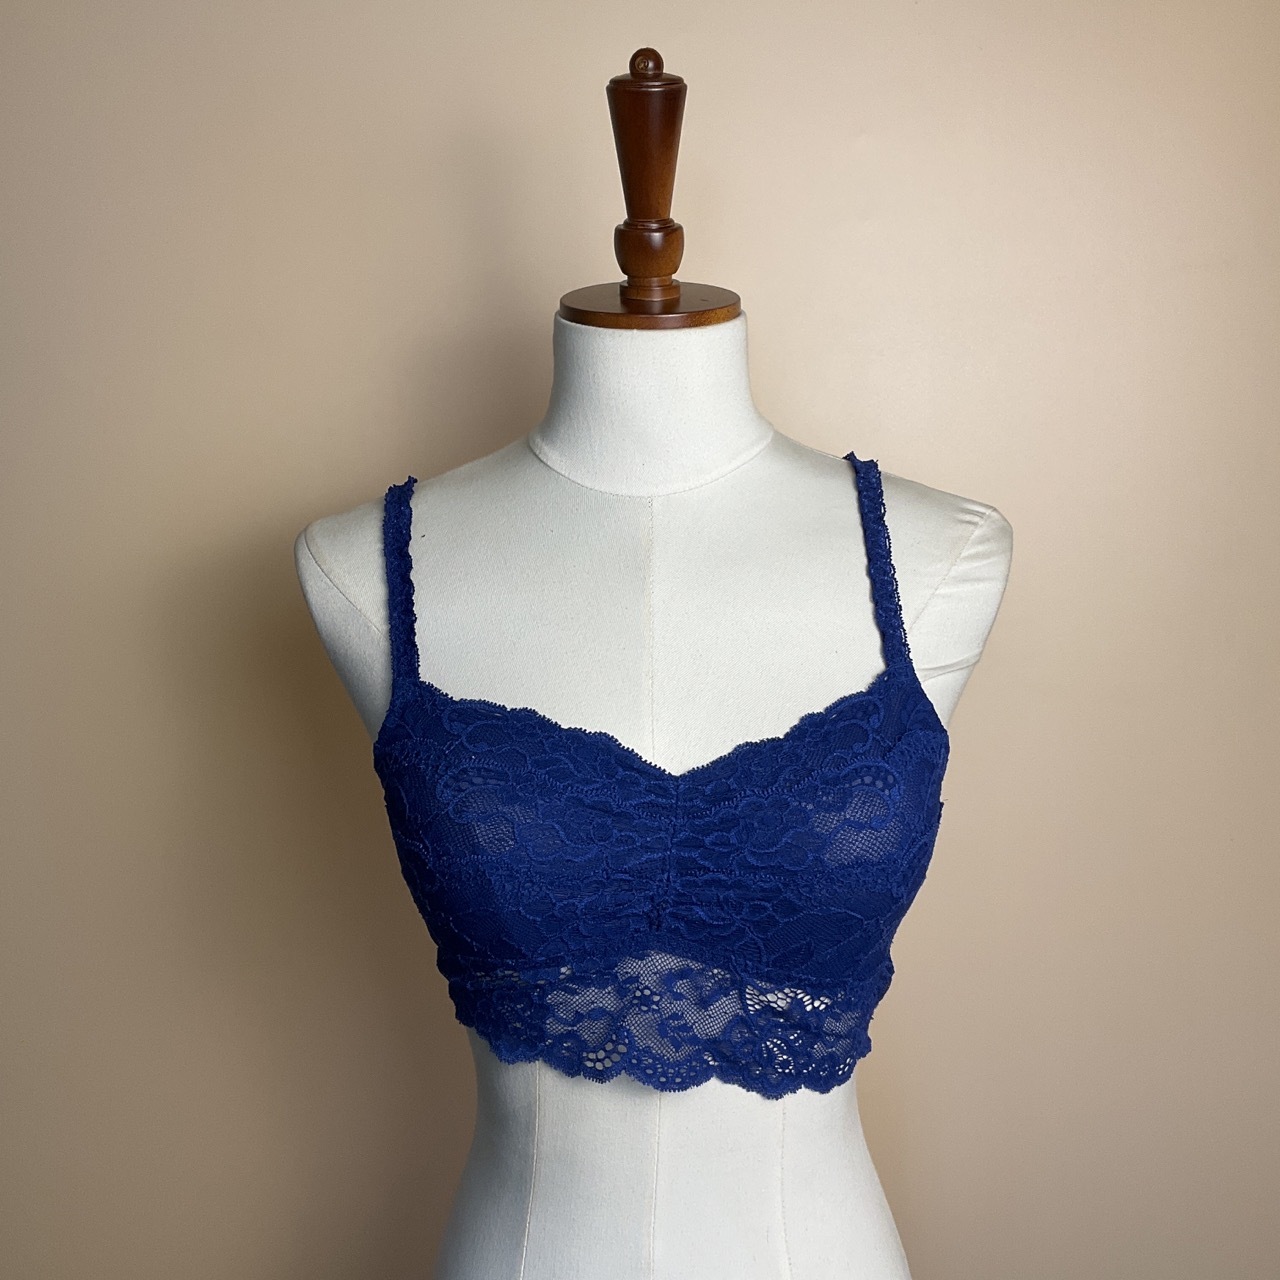 XS - S) FELINA Floral Lace Bralette Top 10917, Women's Fashion, Tops,  Sleeveless on Carousell